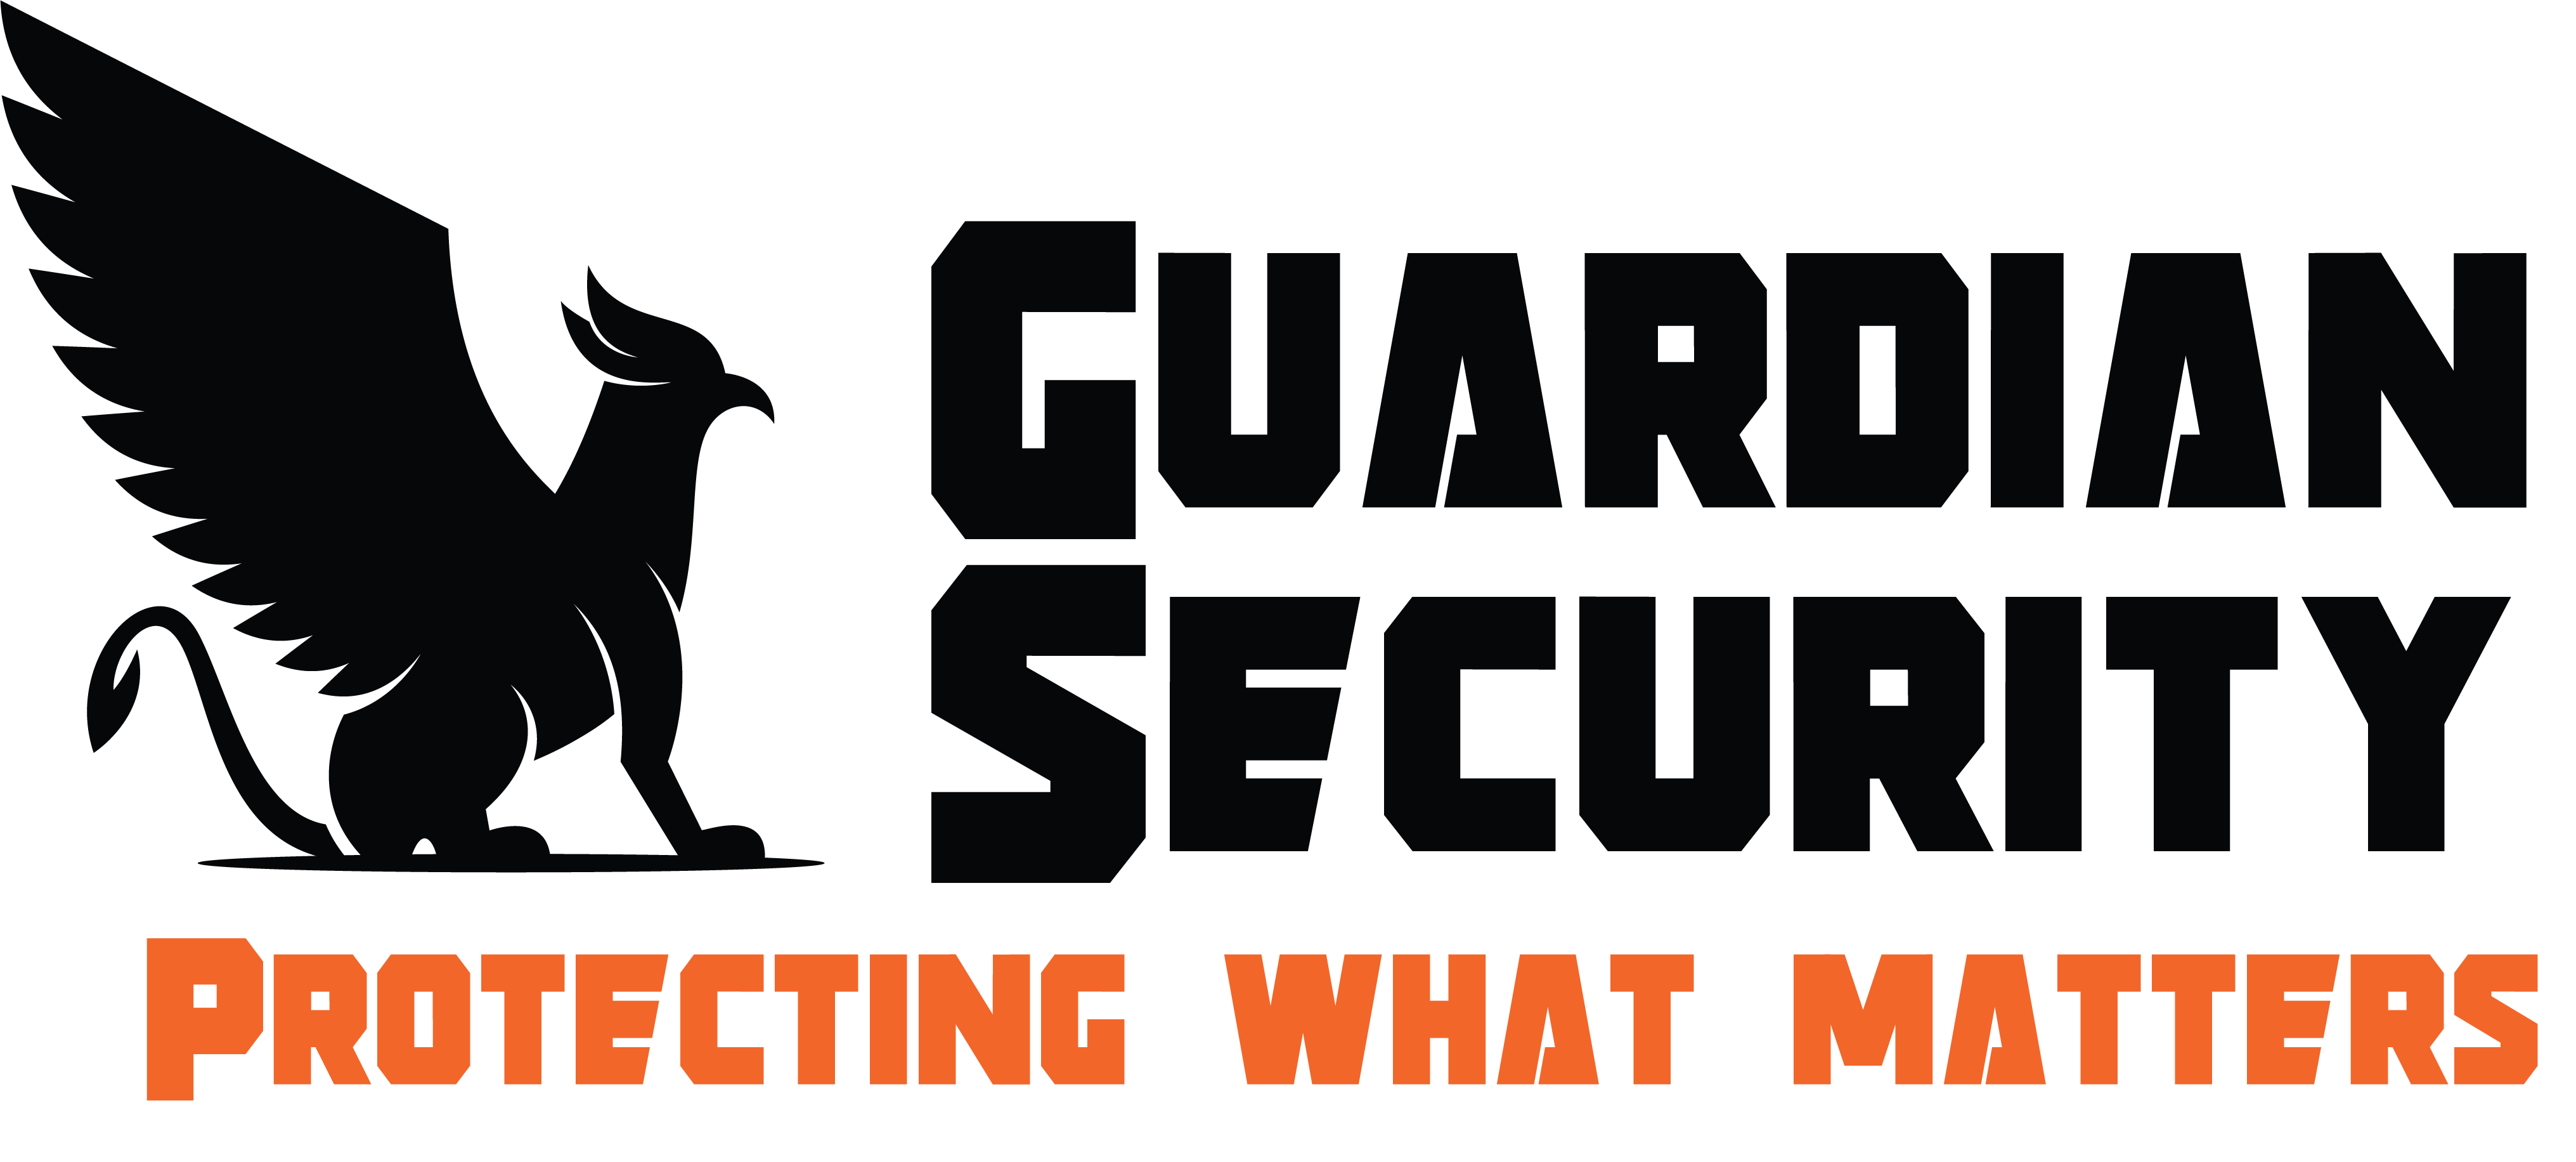 Guardian Security Screens in Utah, serving the Wasatch Front